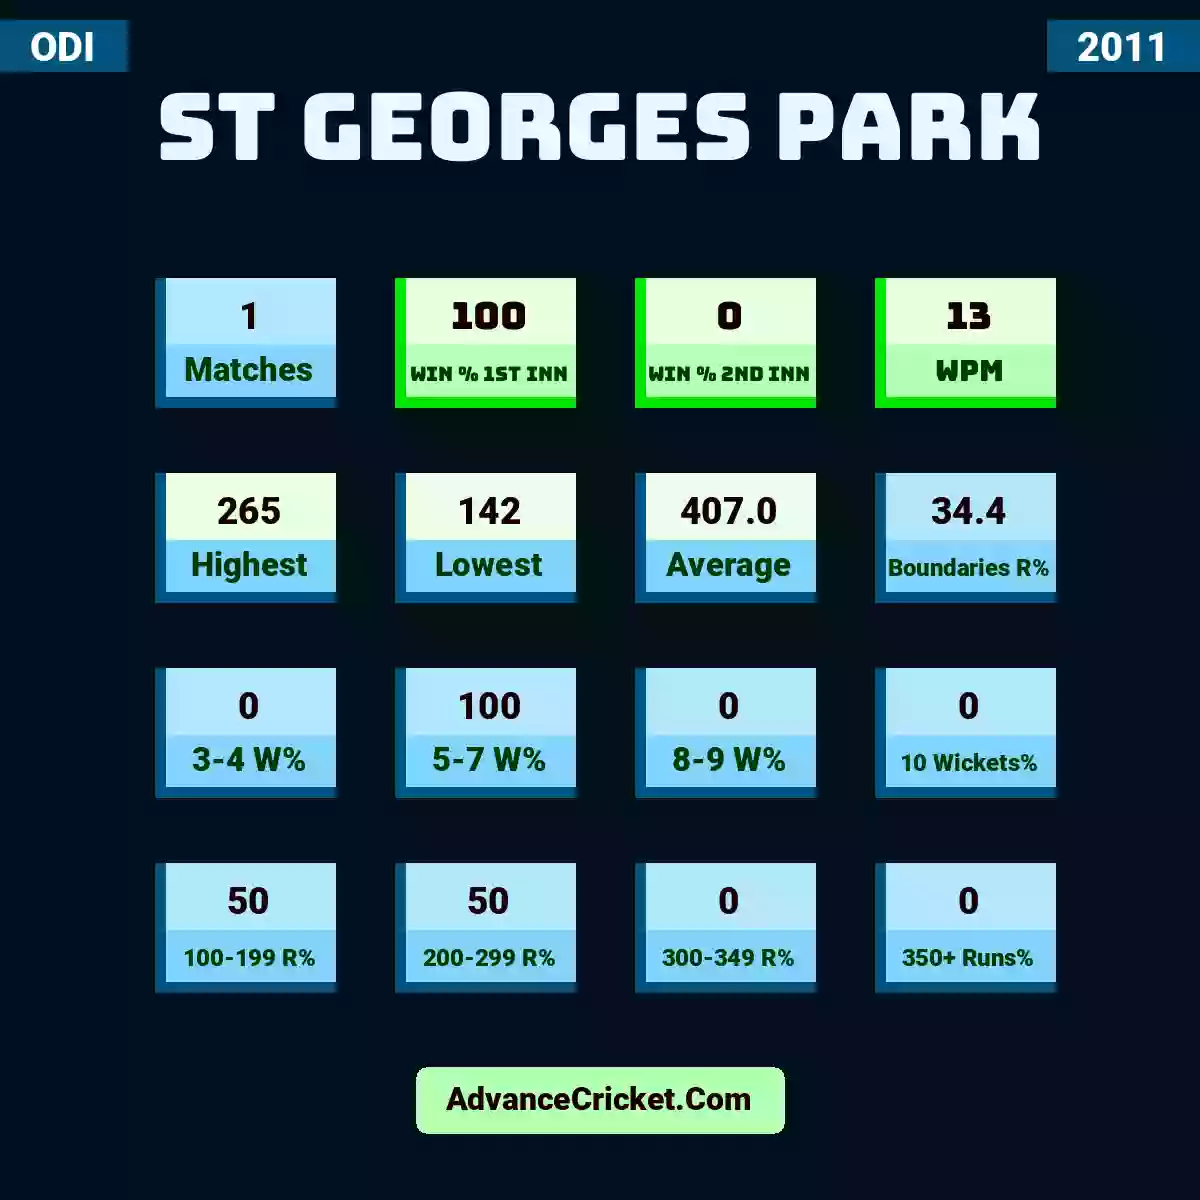 Image showing St Georges Park with Matches: 1, Win % 1st Inn: 100, Win % 2nd Inn: 0, WPM: 13, Highest: 265, Lowest: 142, Average: 407.0, Boundaries R%: 34.4, 3-4 W%: 0, 5-7 W%: 100, 8-9 W%: 0, 10 Wickets%: 0, 100-199 R%: 50, 200-299 R%: 50, 300-349 R%: 0, 350+ Runs%: 0.